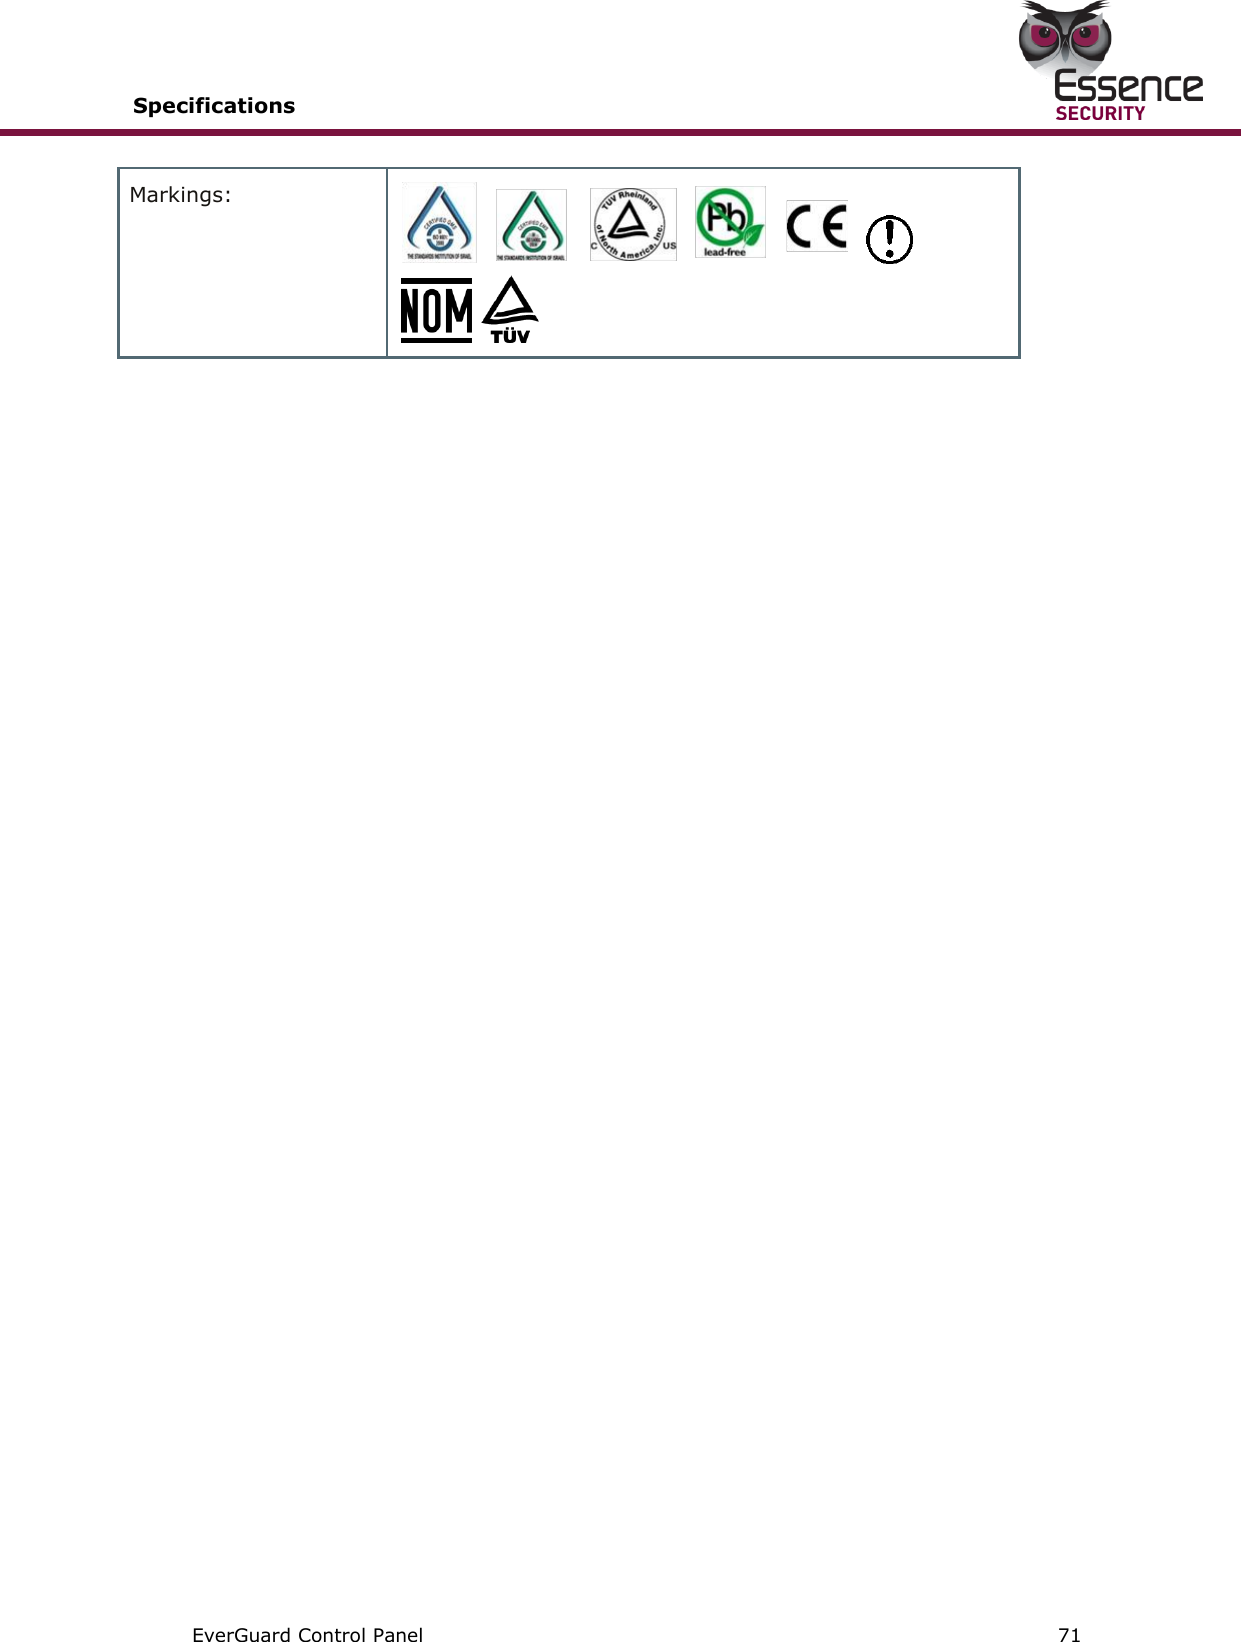 Specifications       EverGuard Control Panel  71  Markings:            